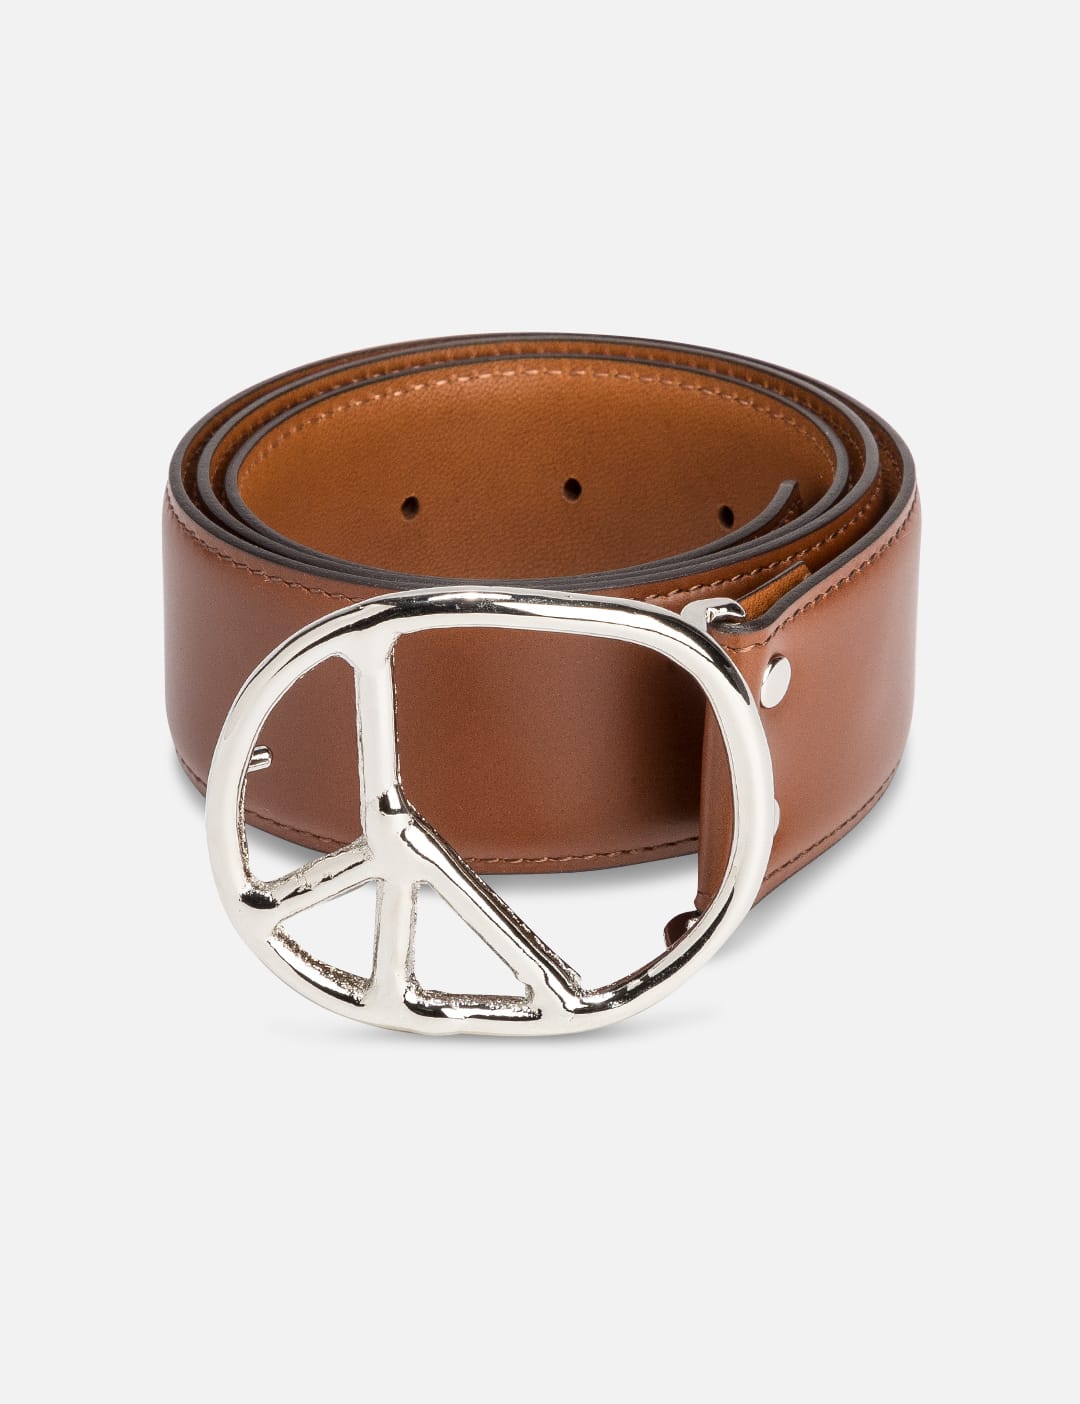 Needles - Peace Buckle Belt | HBX - Globally Curated Fashion and